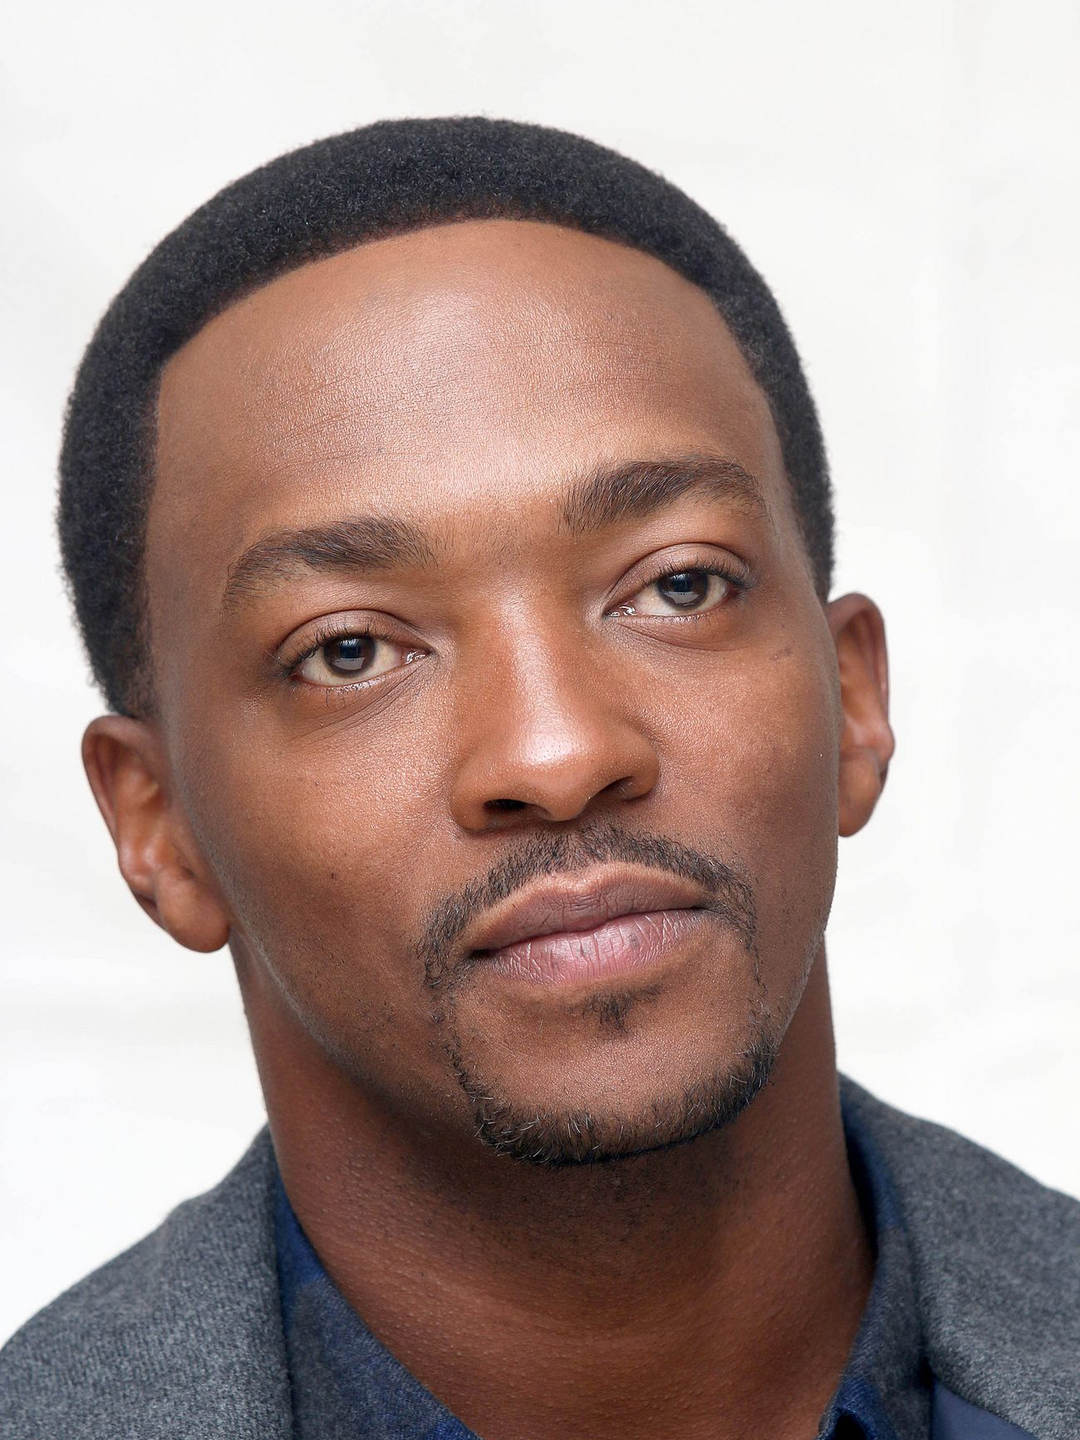 Anthony Mackie does he have a wife